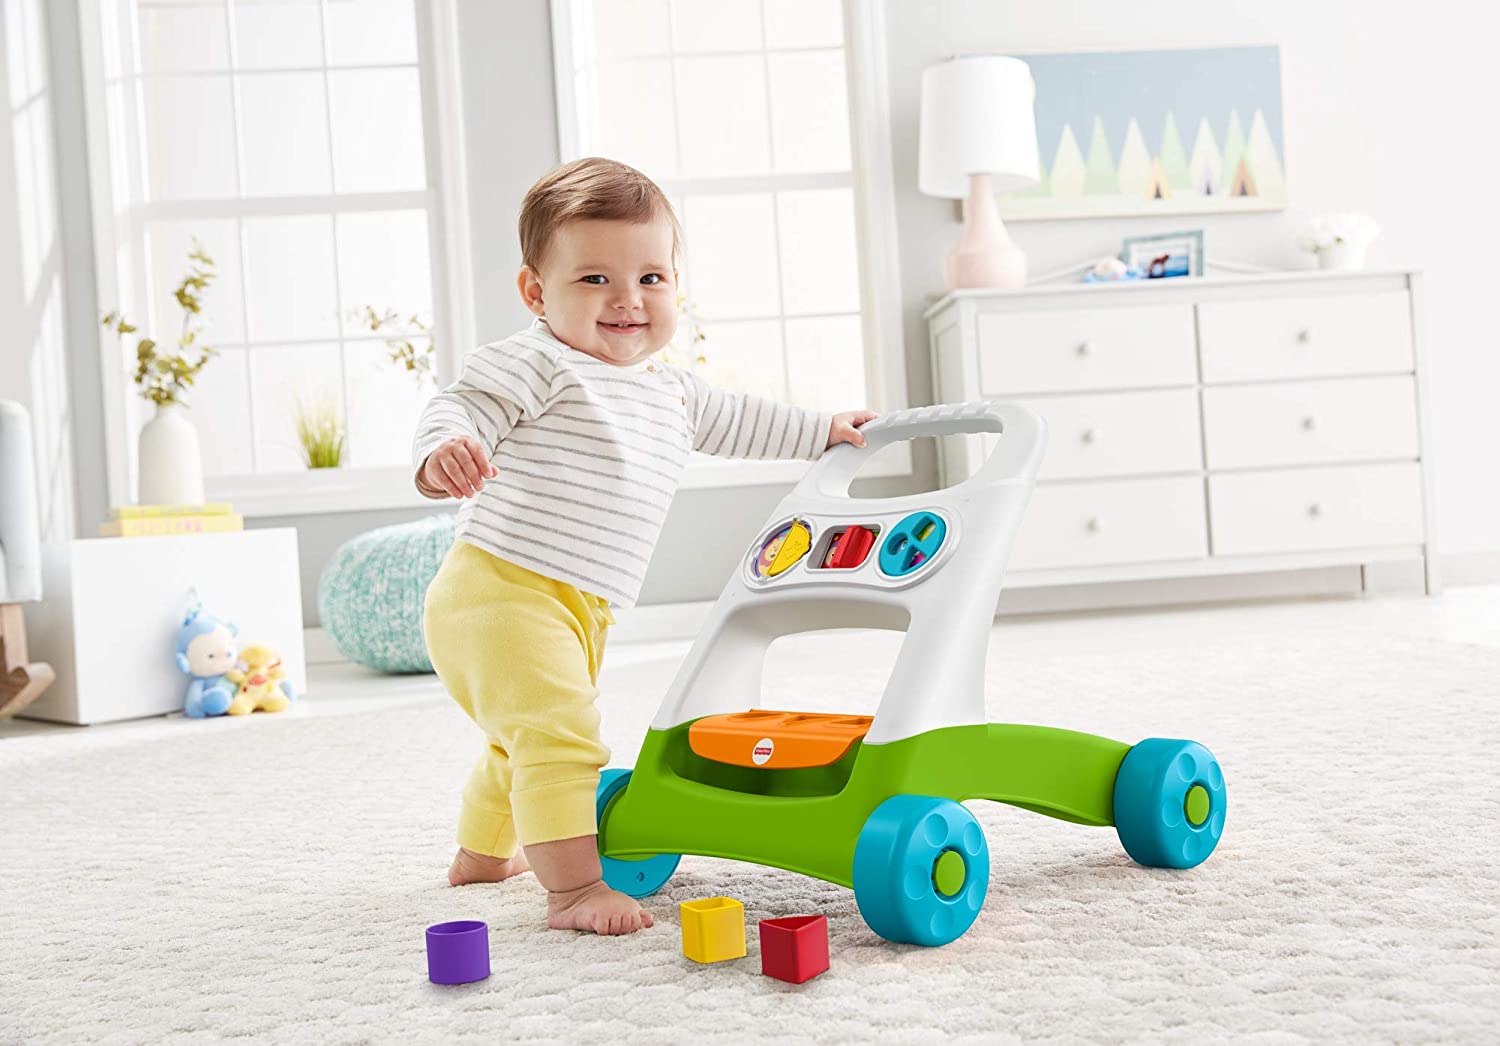 Fisher Price Busy Activity Walker - One Shop Online Toys in Pakistan